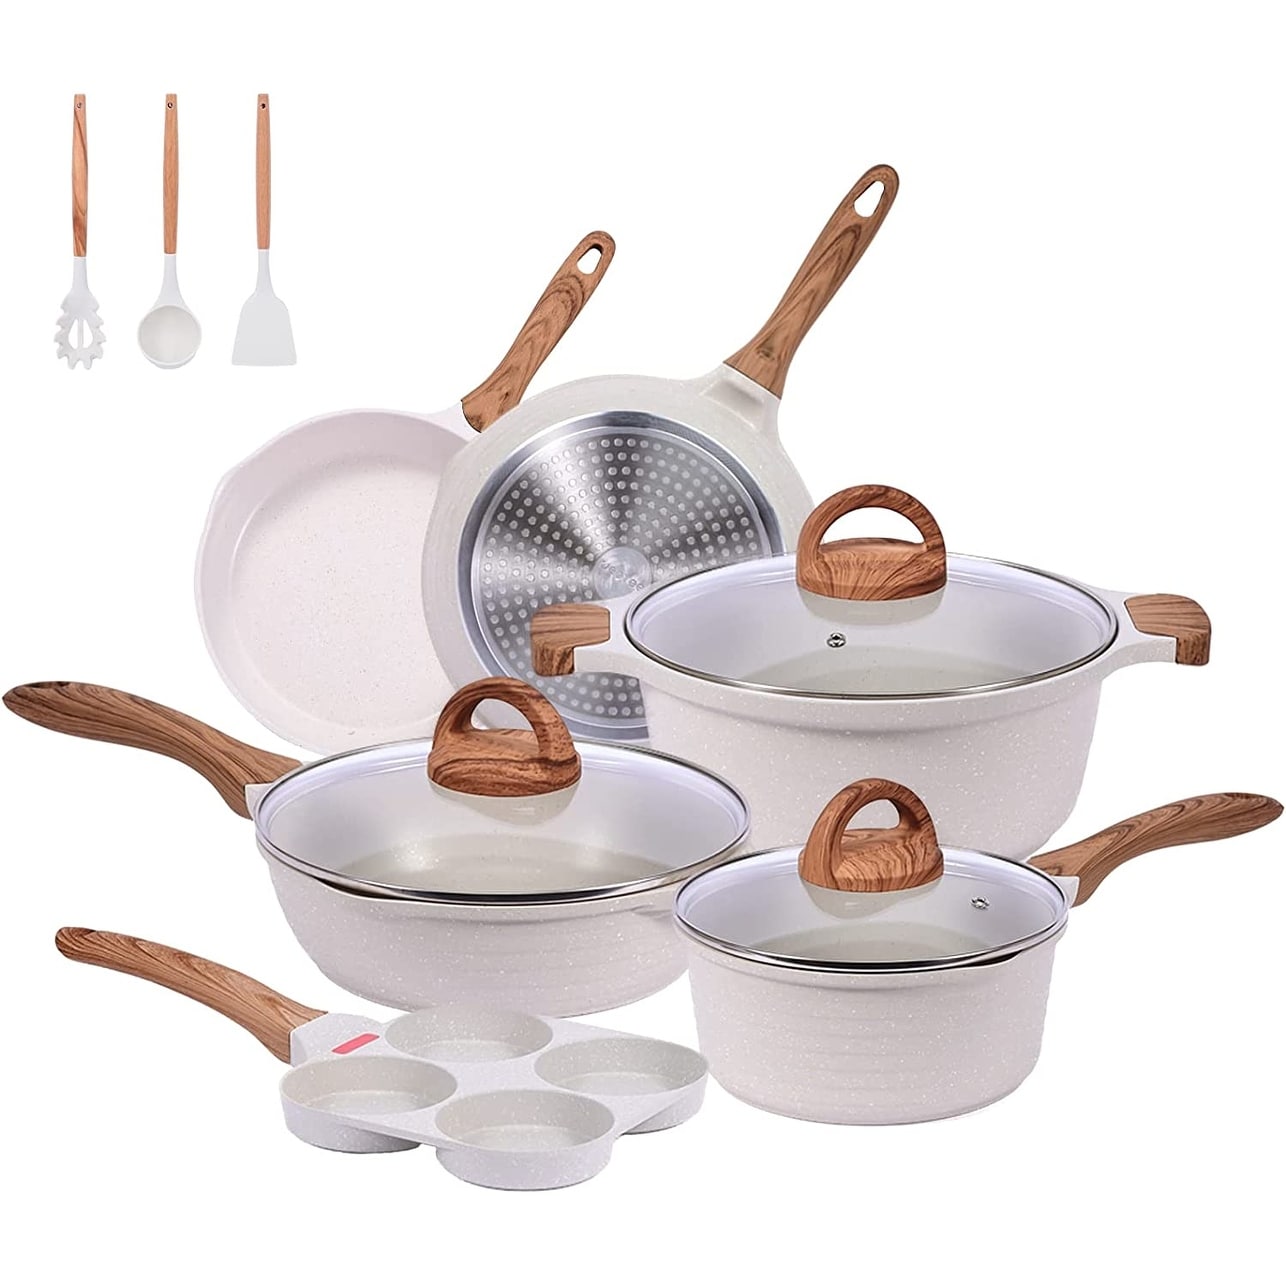 https://ak1.ostkcdn.com/images/products/is/images/direct/d3e0fce2f4288fa26808e1785fd850a5f246f417/Kitchen-Pots-and-Pans-Set-Nonstick%2C-Induction-Granite-Coating-Cookware-Sets.jpg